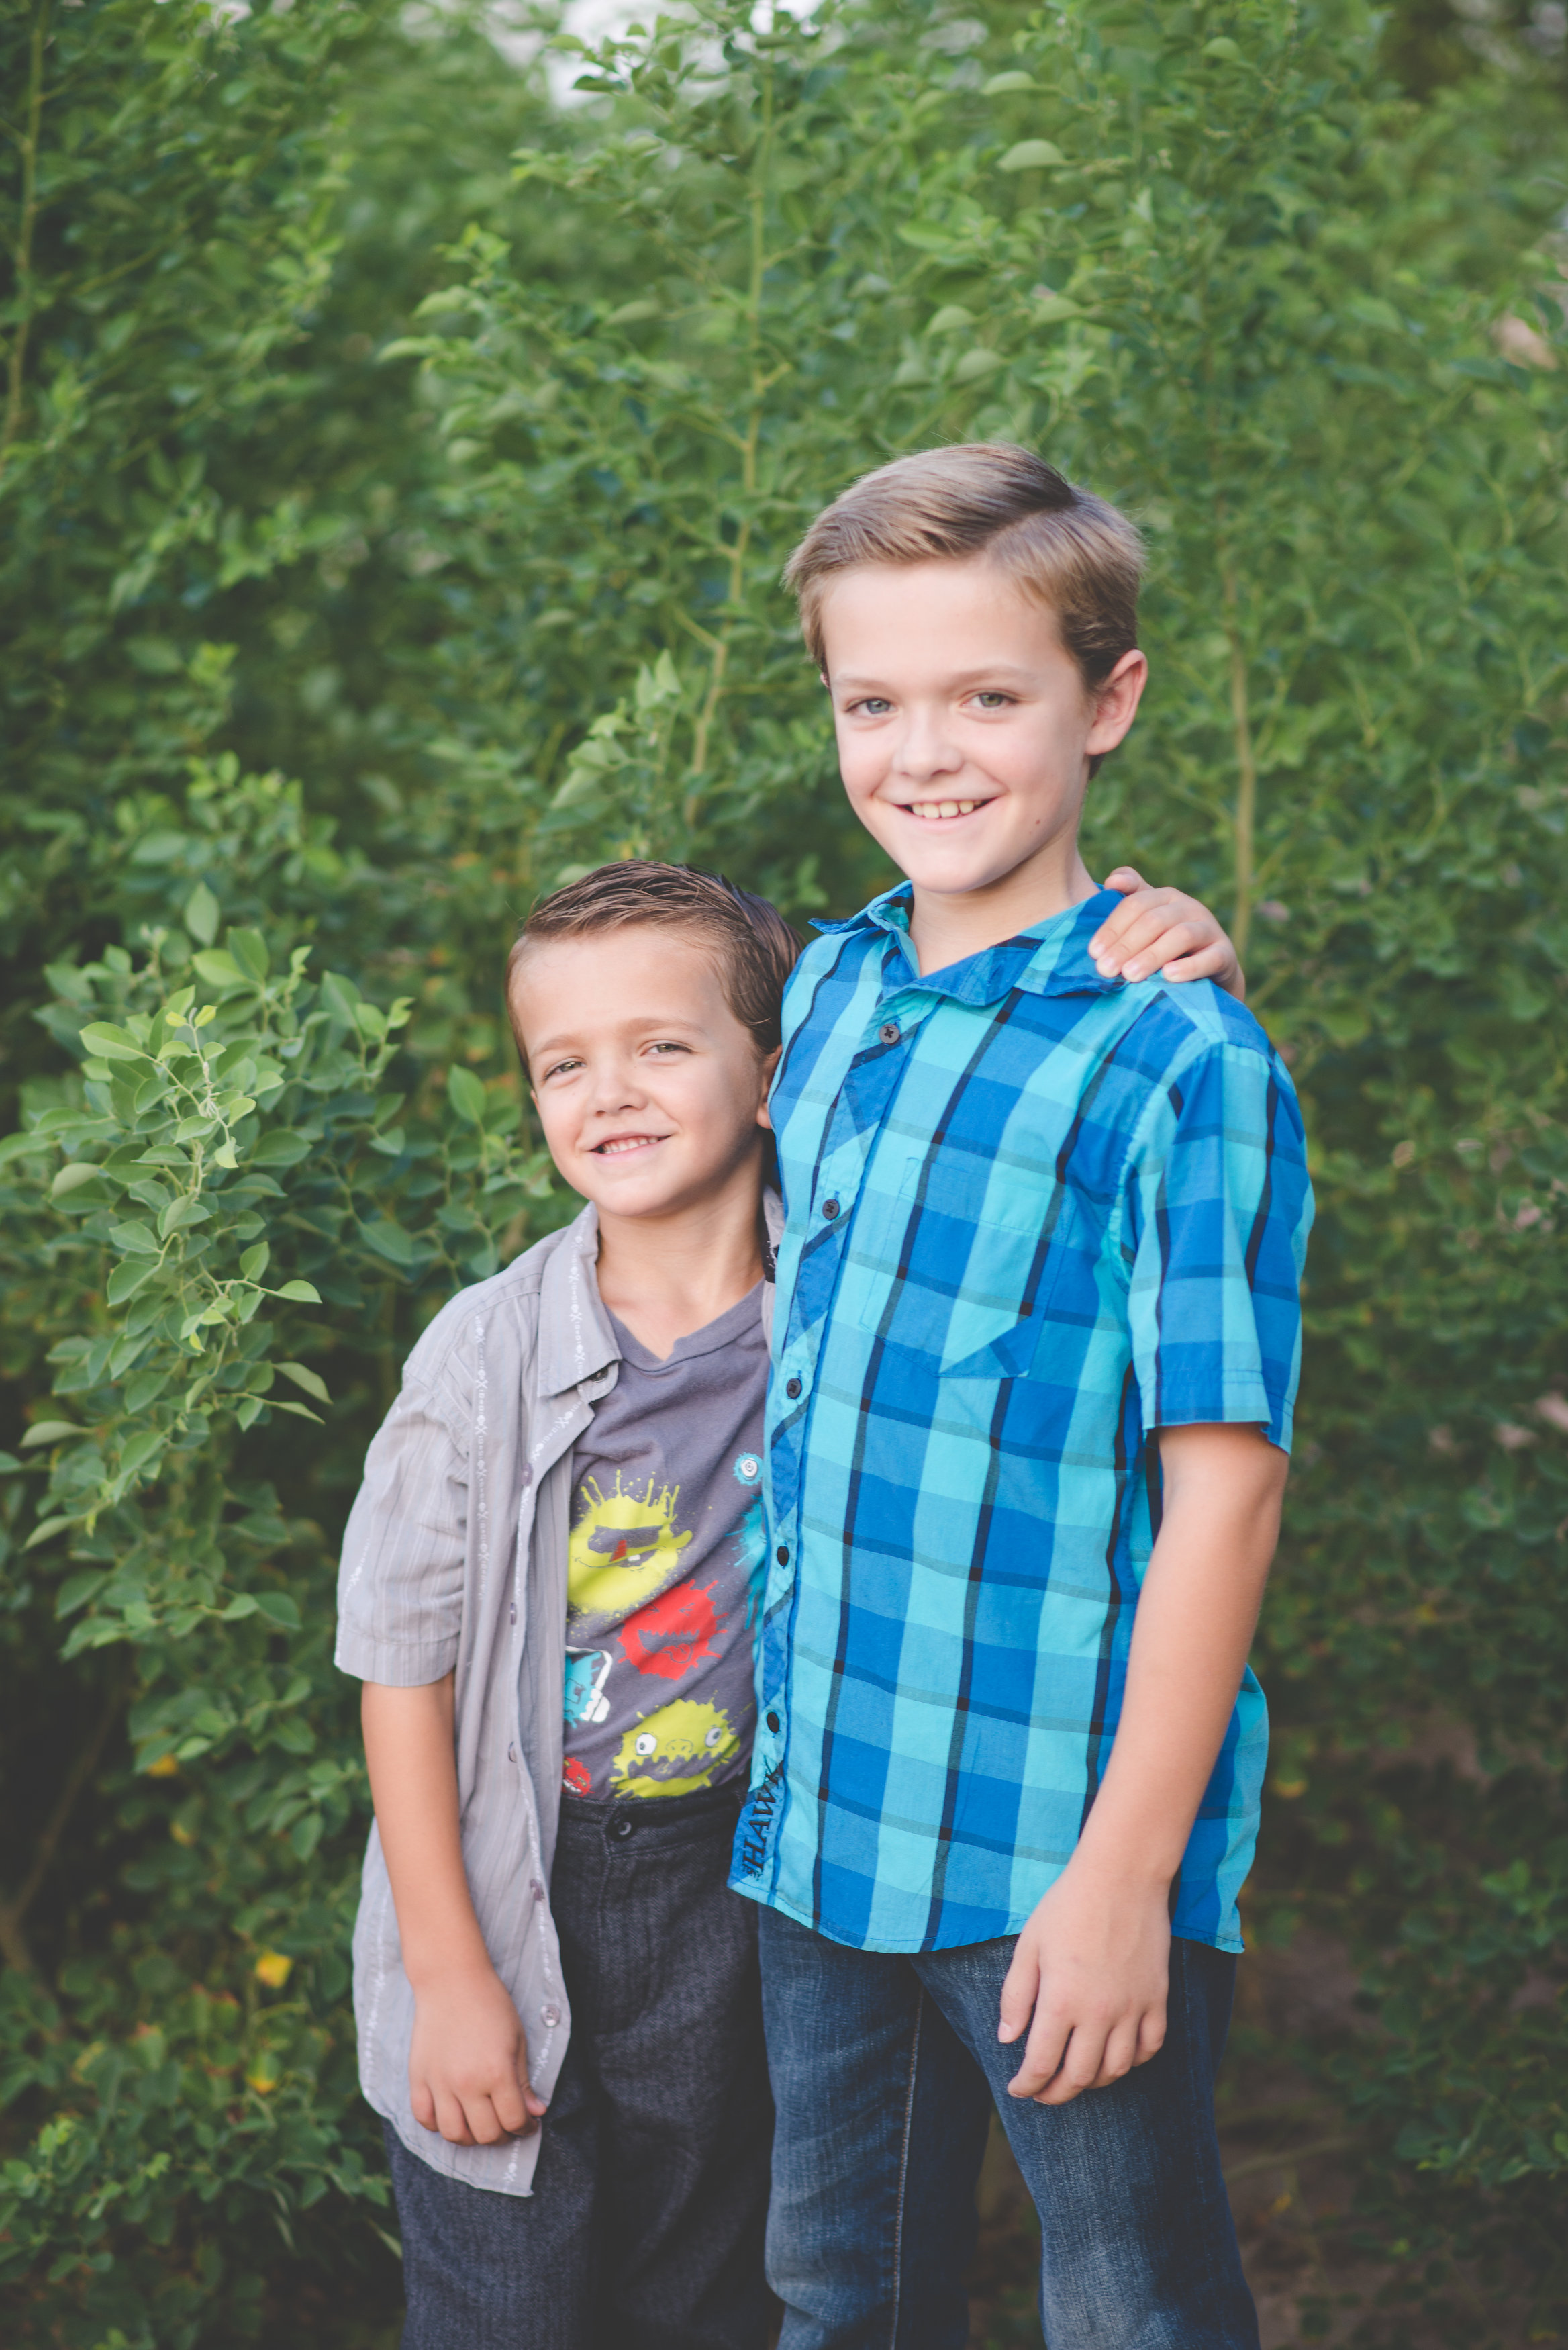 Elliot (with older brother) - September 2015 (6 years old)